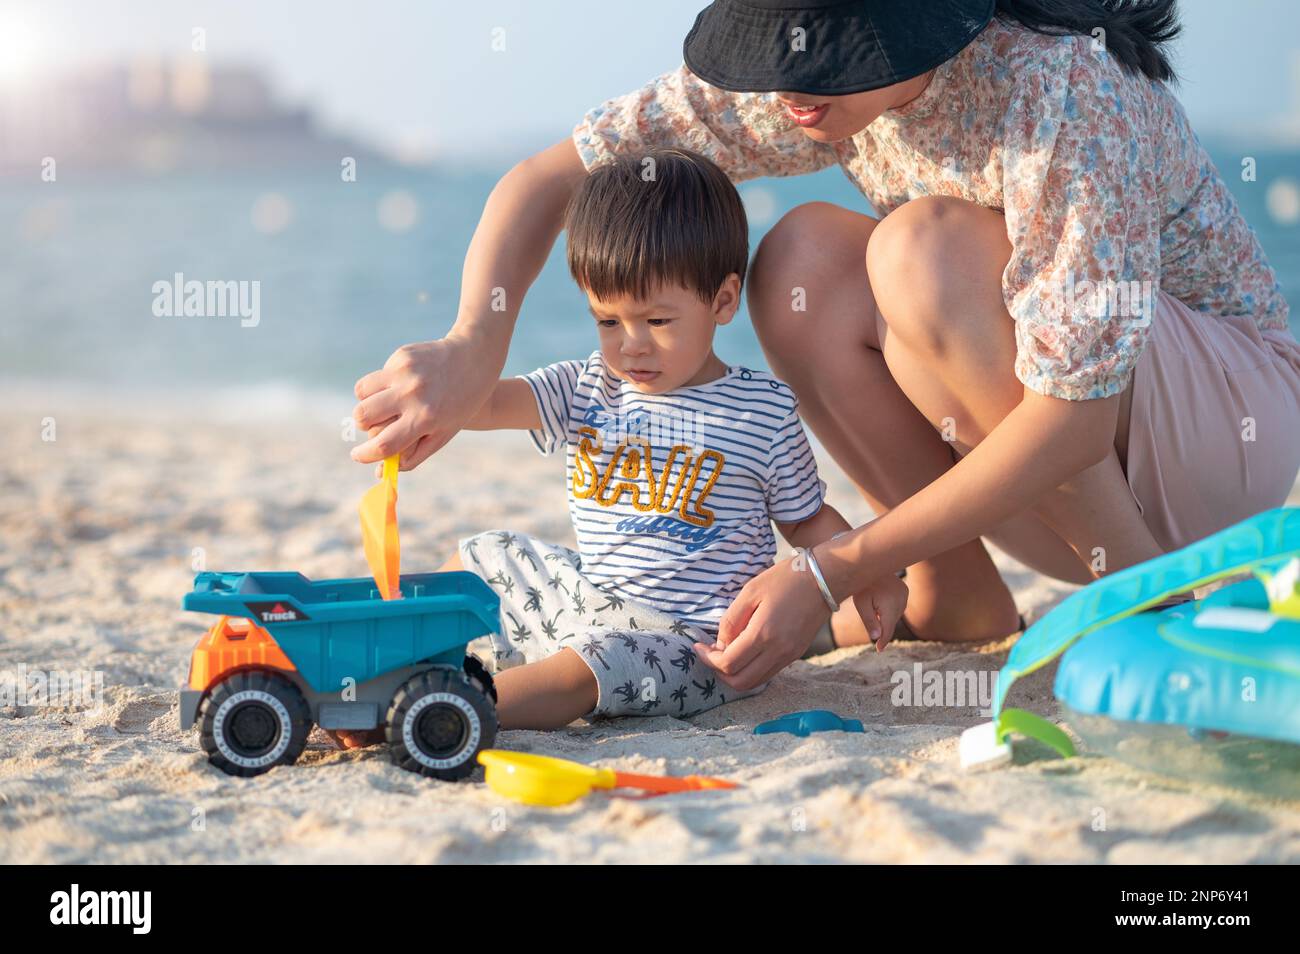 Mother playing with a toy truck and the sand on the beach with her baby boy enjoying the summer together by the seaside. Filled with joy and emotion t Stock Photo